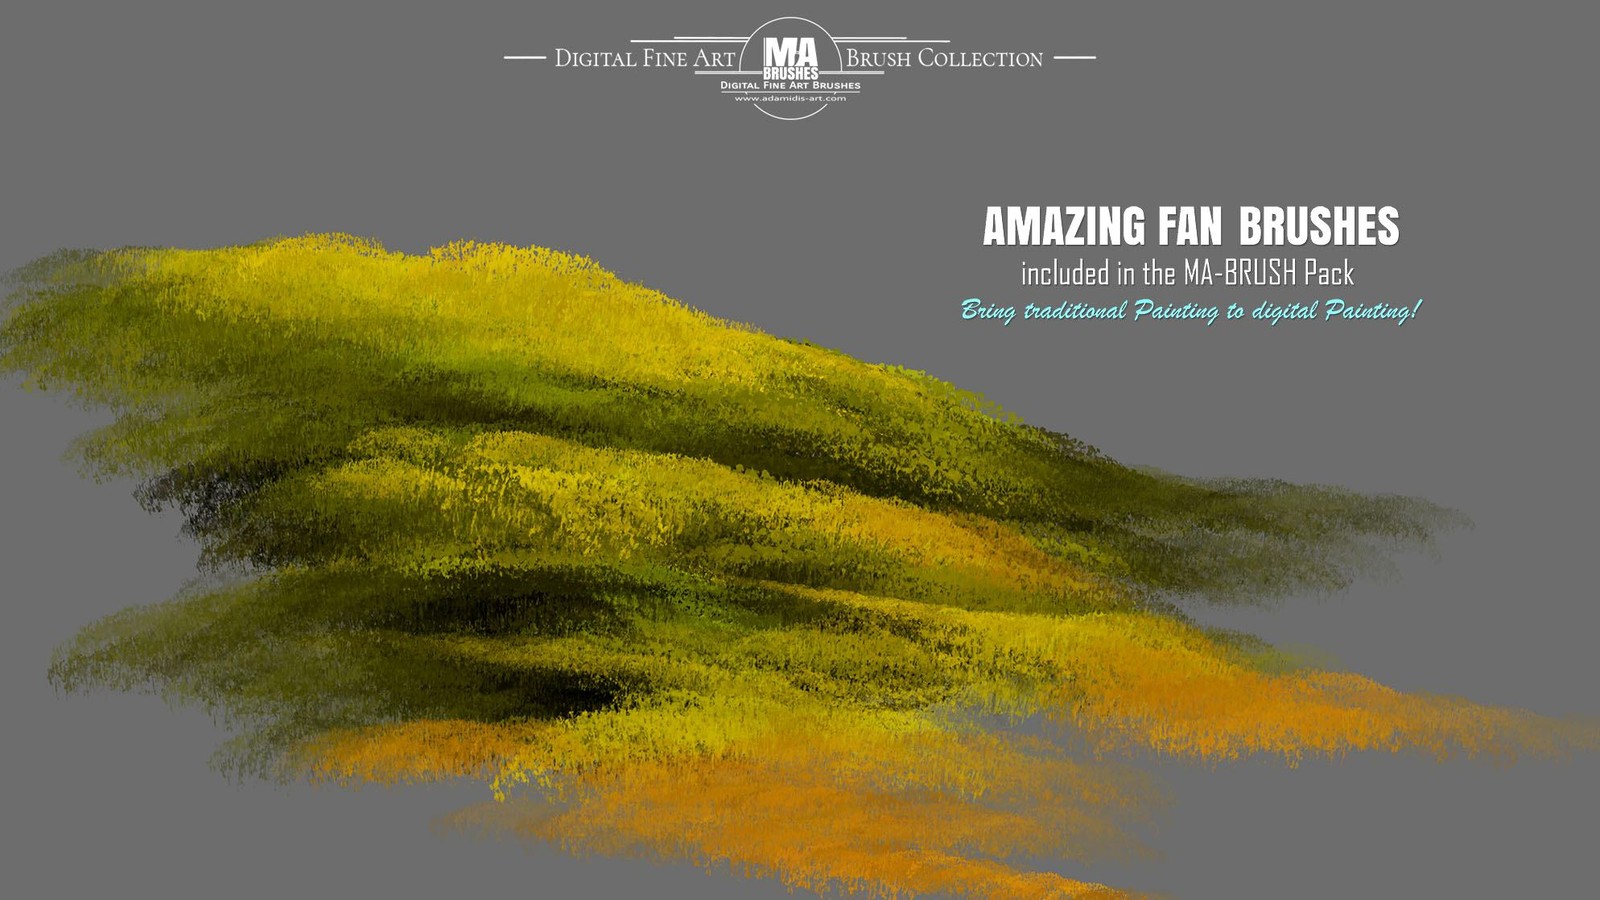 MA-Brushes the perfect combination of traditional Art and digital Art. Here: Fan Brushes 